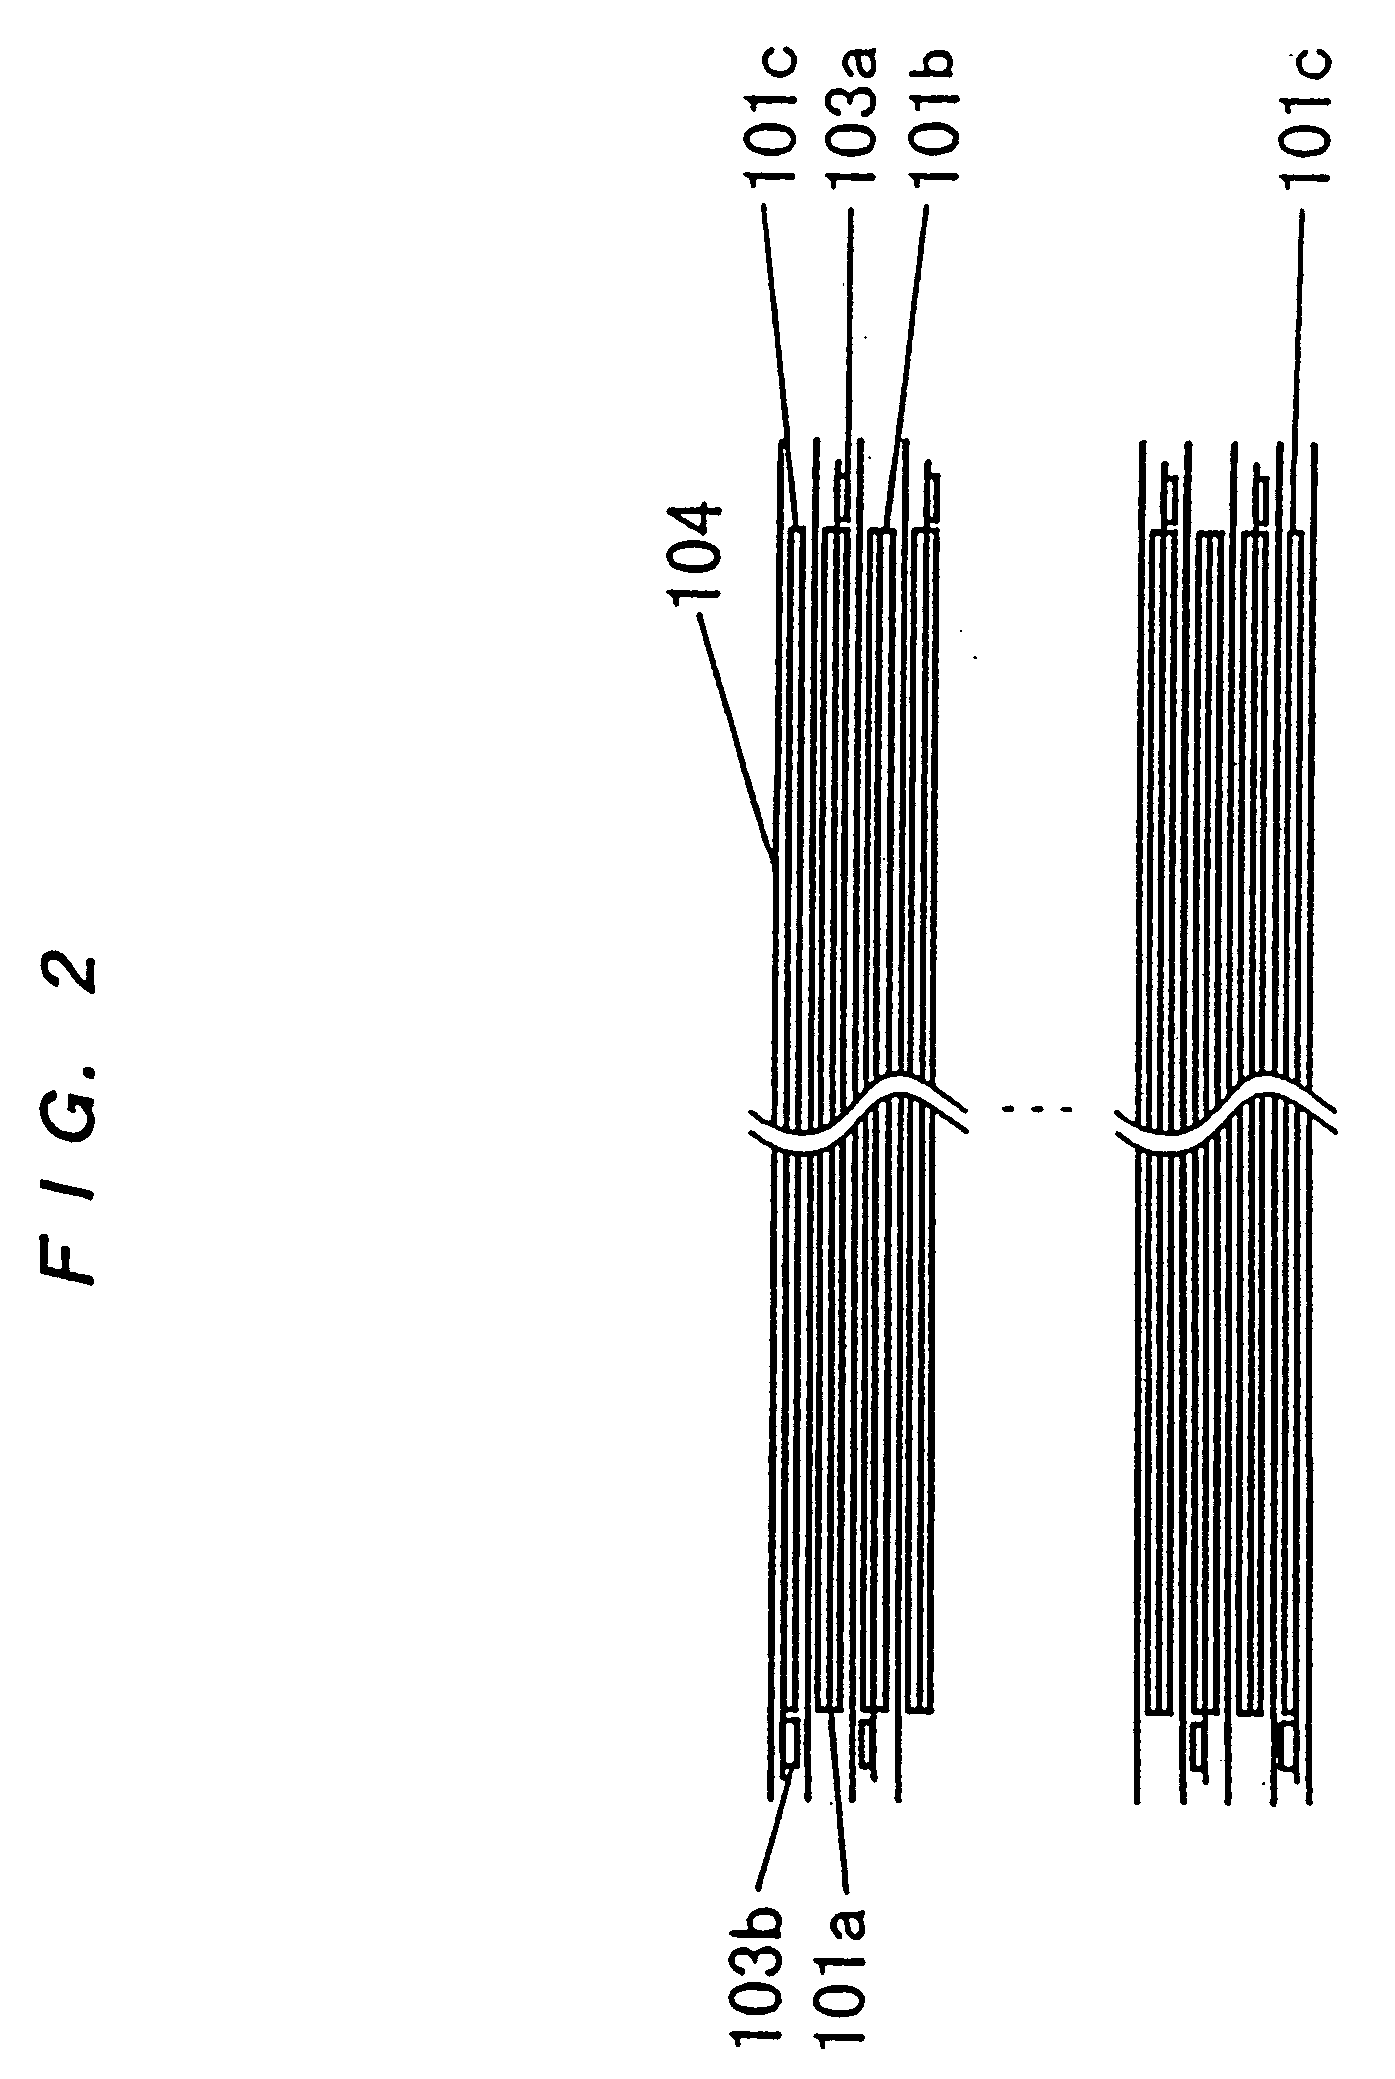 Non-aqueous secondary battery and its control method